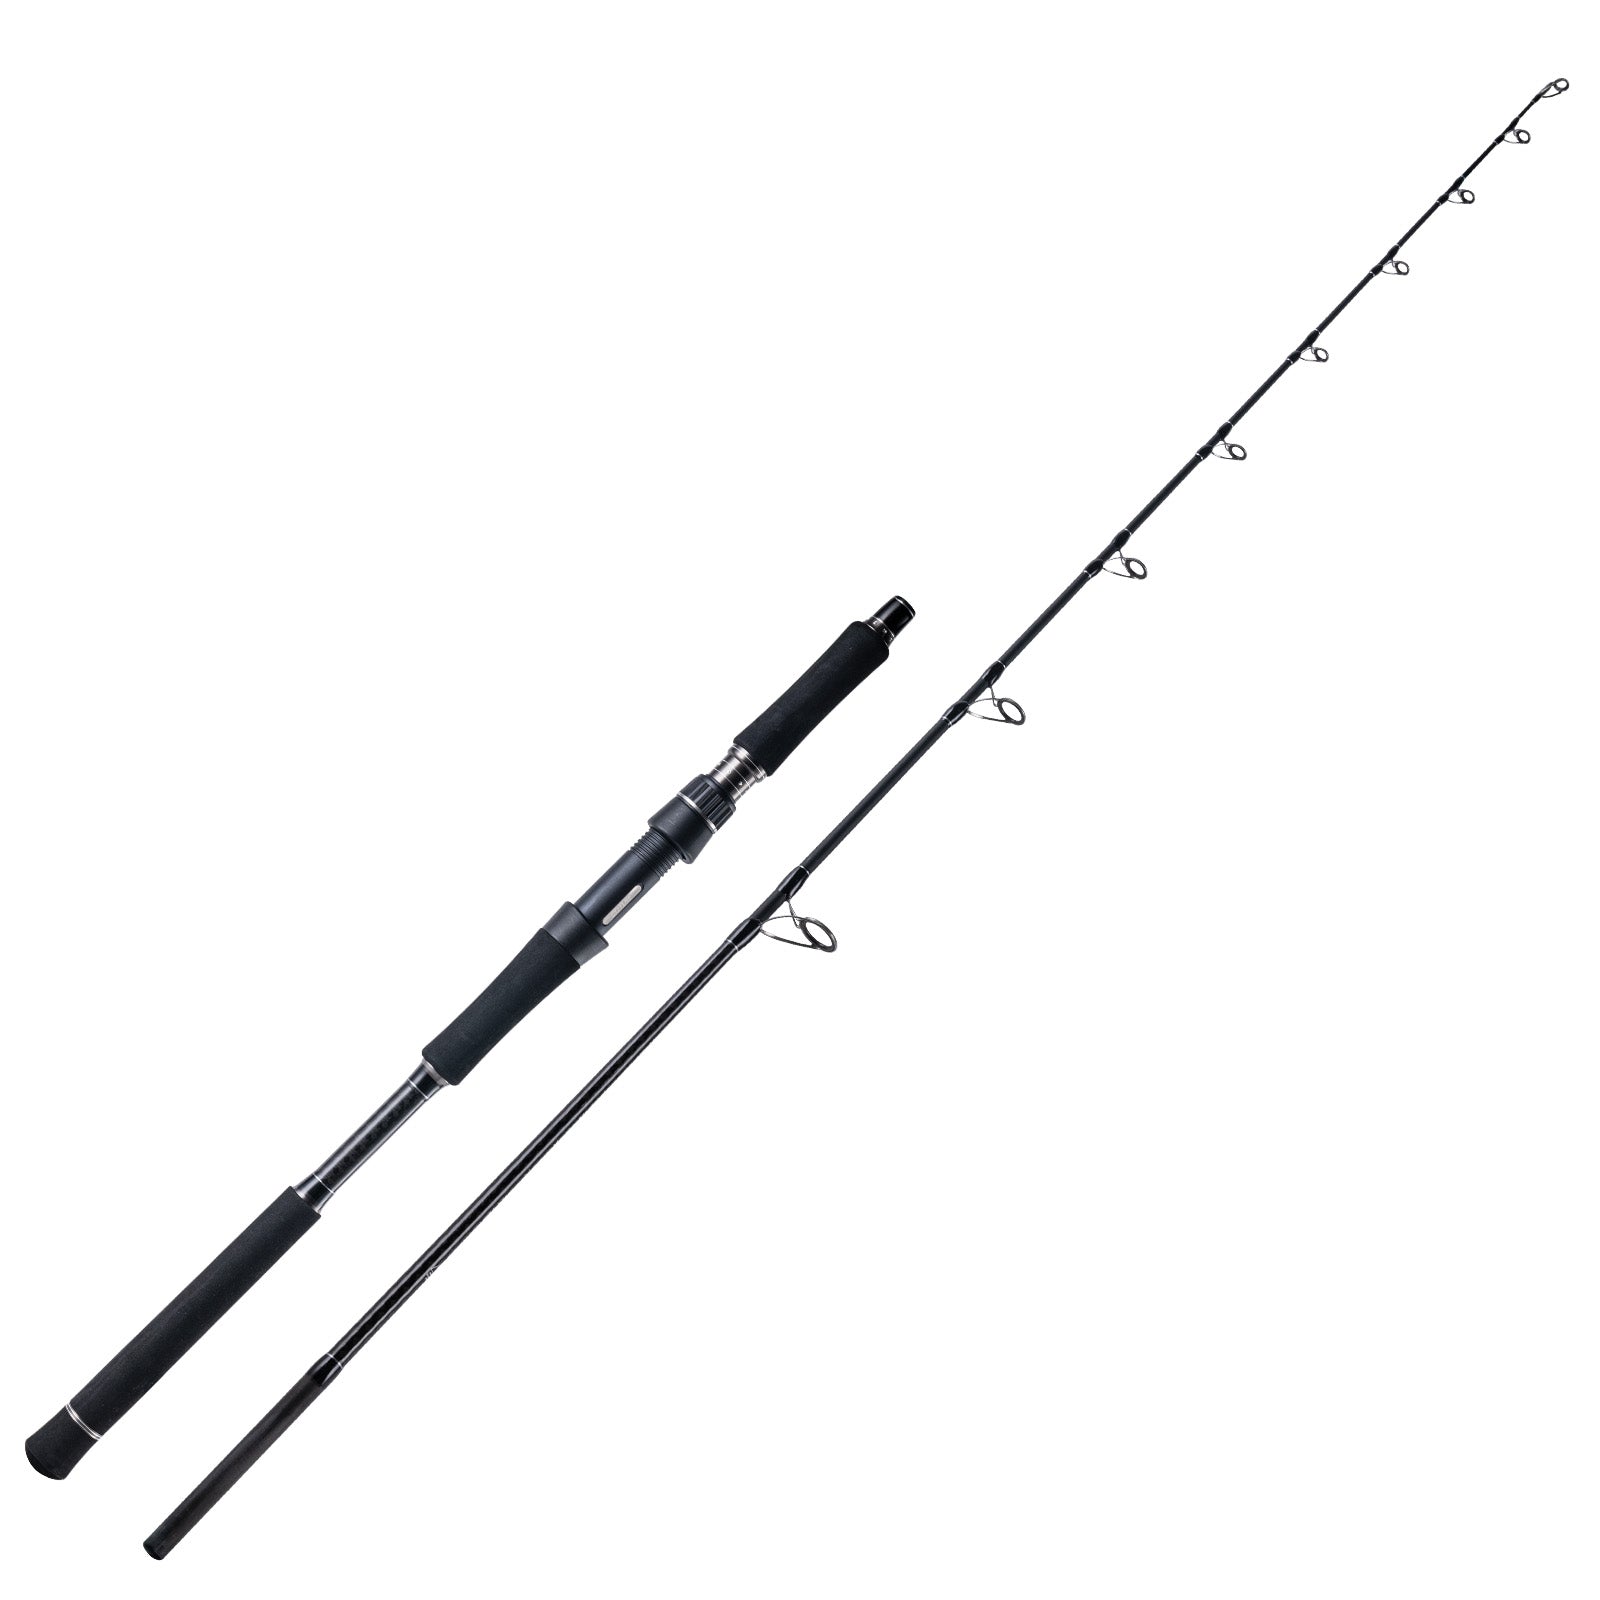 Goture Ultralight Fishing Rod, 2 Piece Crappie Trout Rod, Spinning/Casting  Rod - 1.65M-Spinning